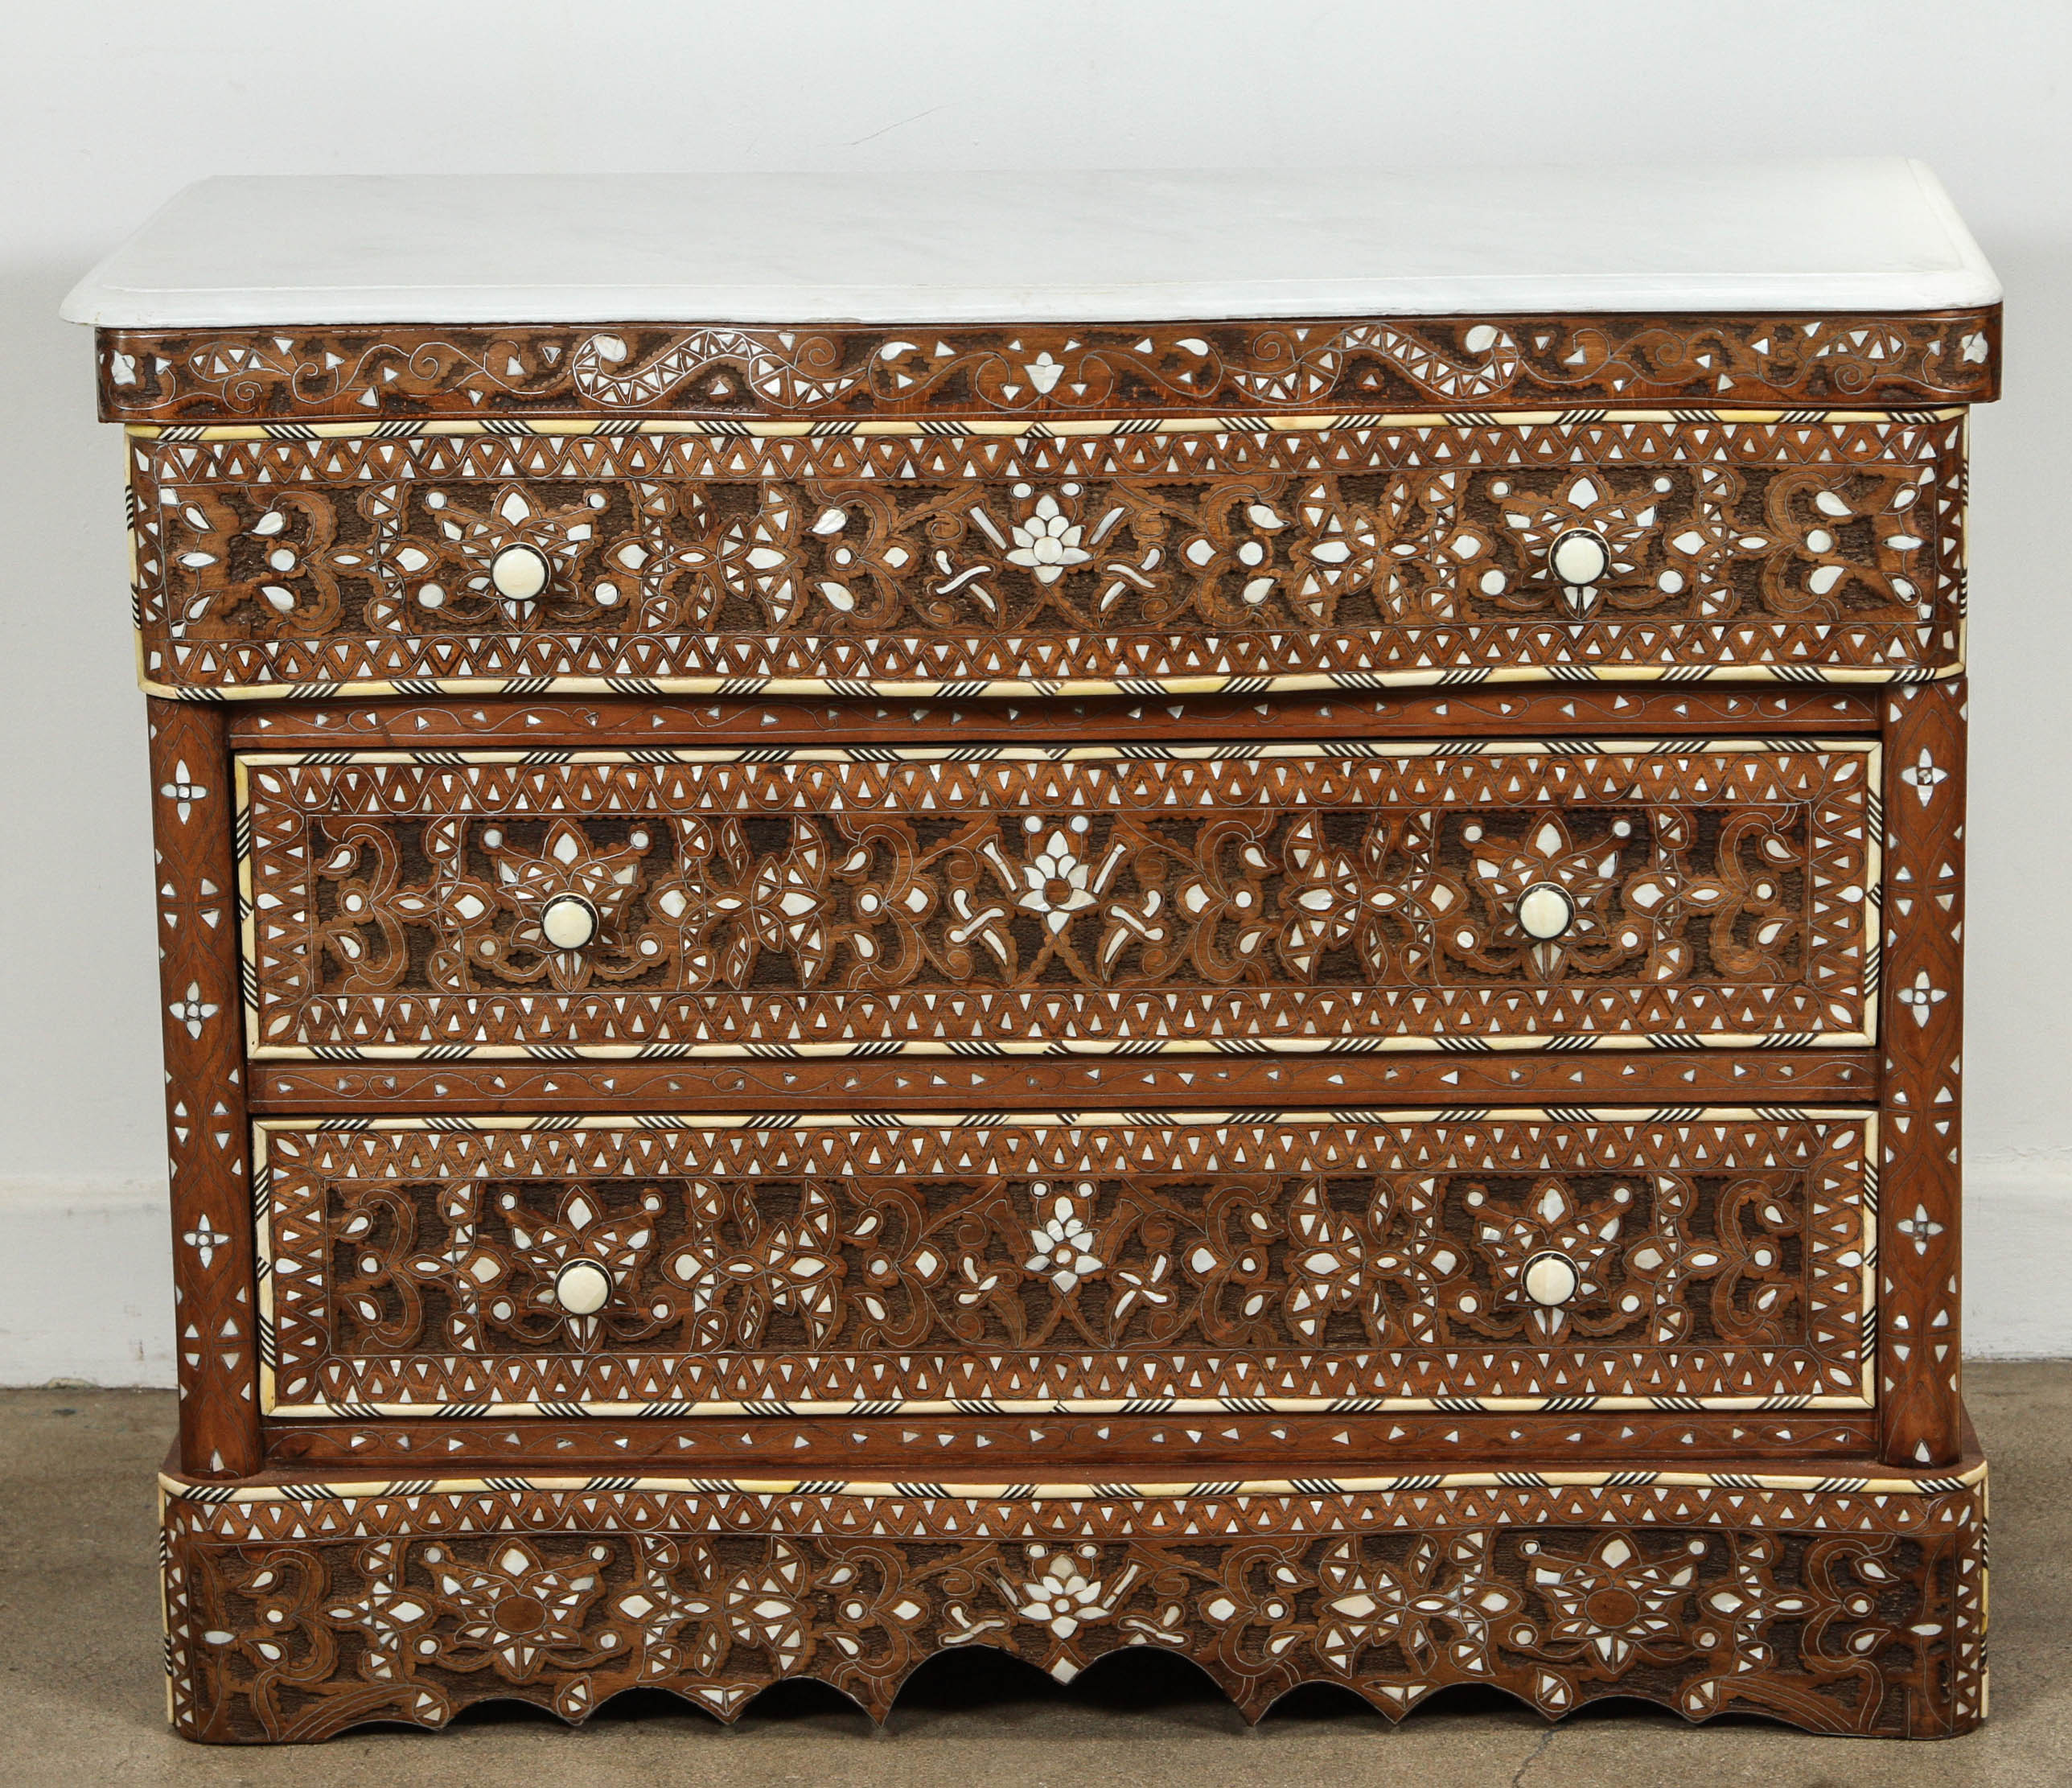 Syrian Wedding Chest of Drawers Inlay